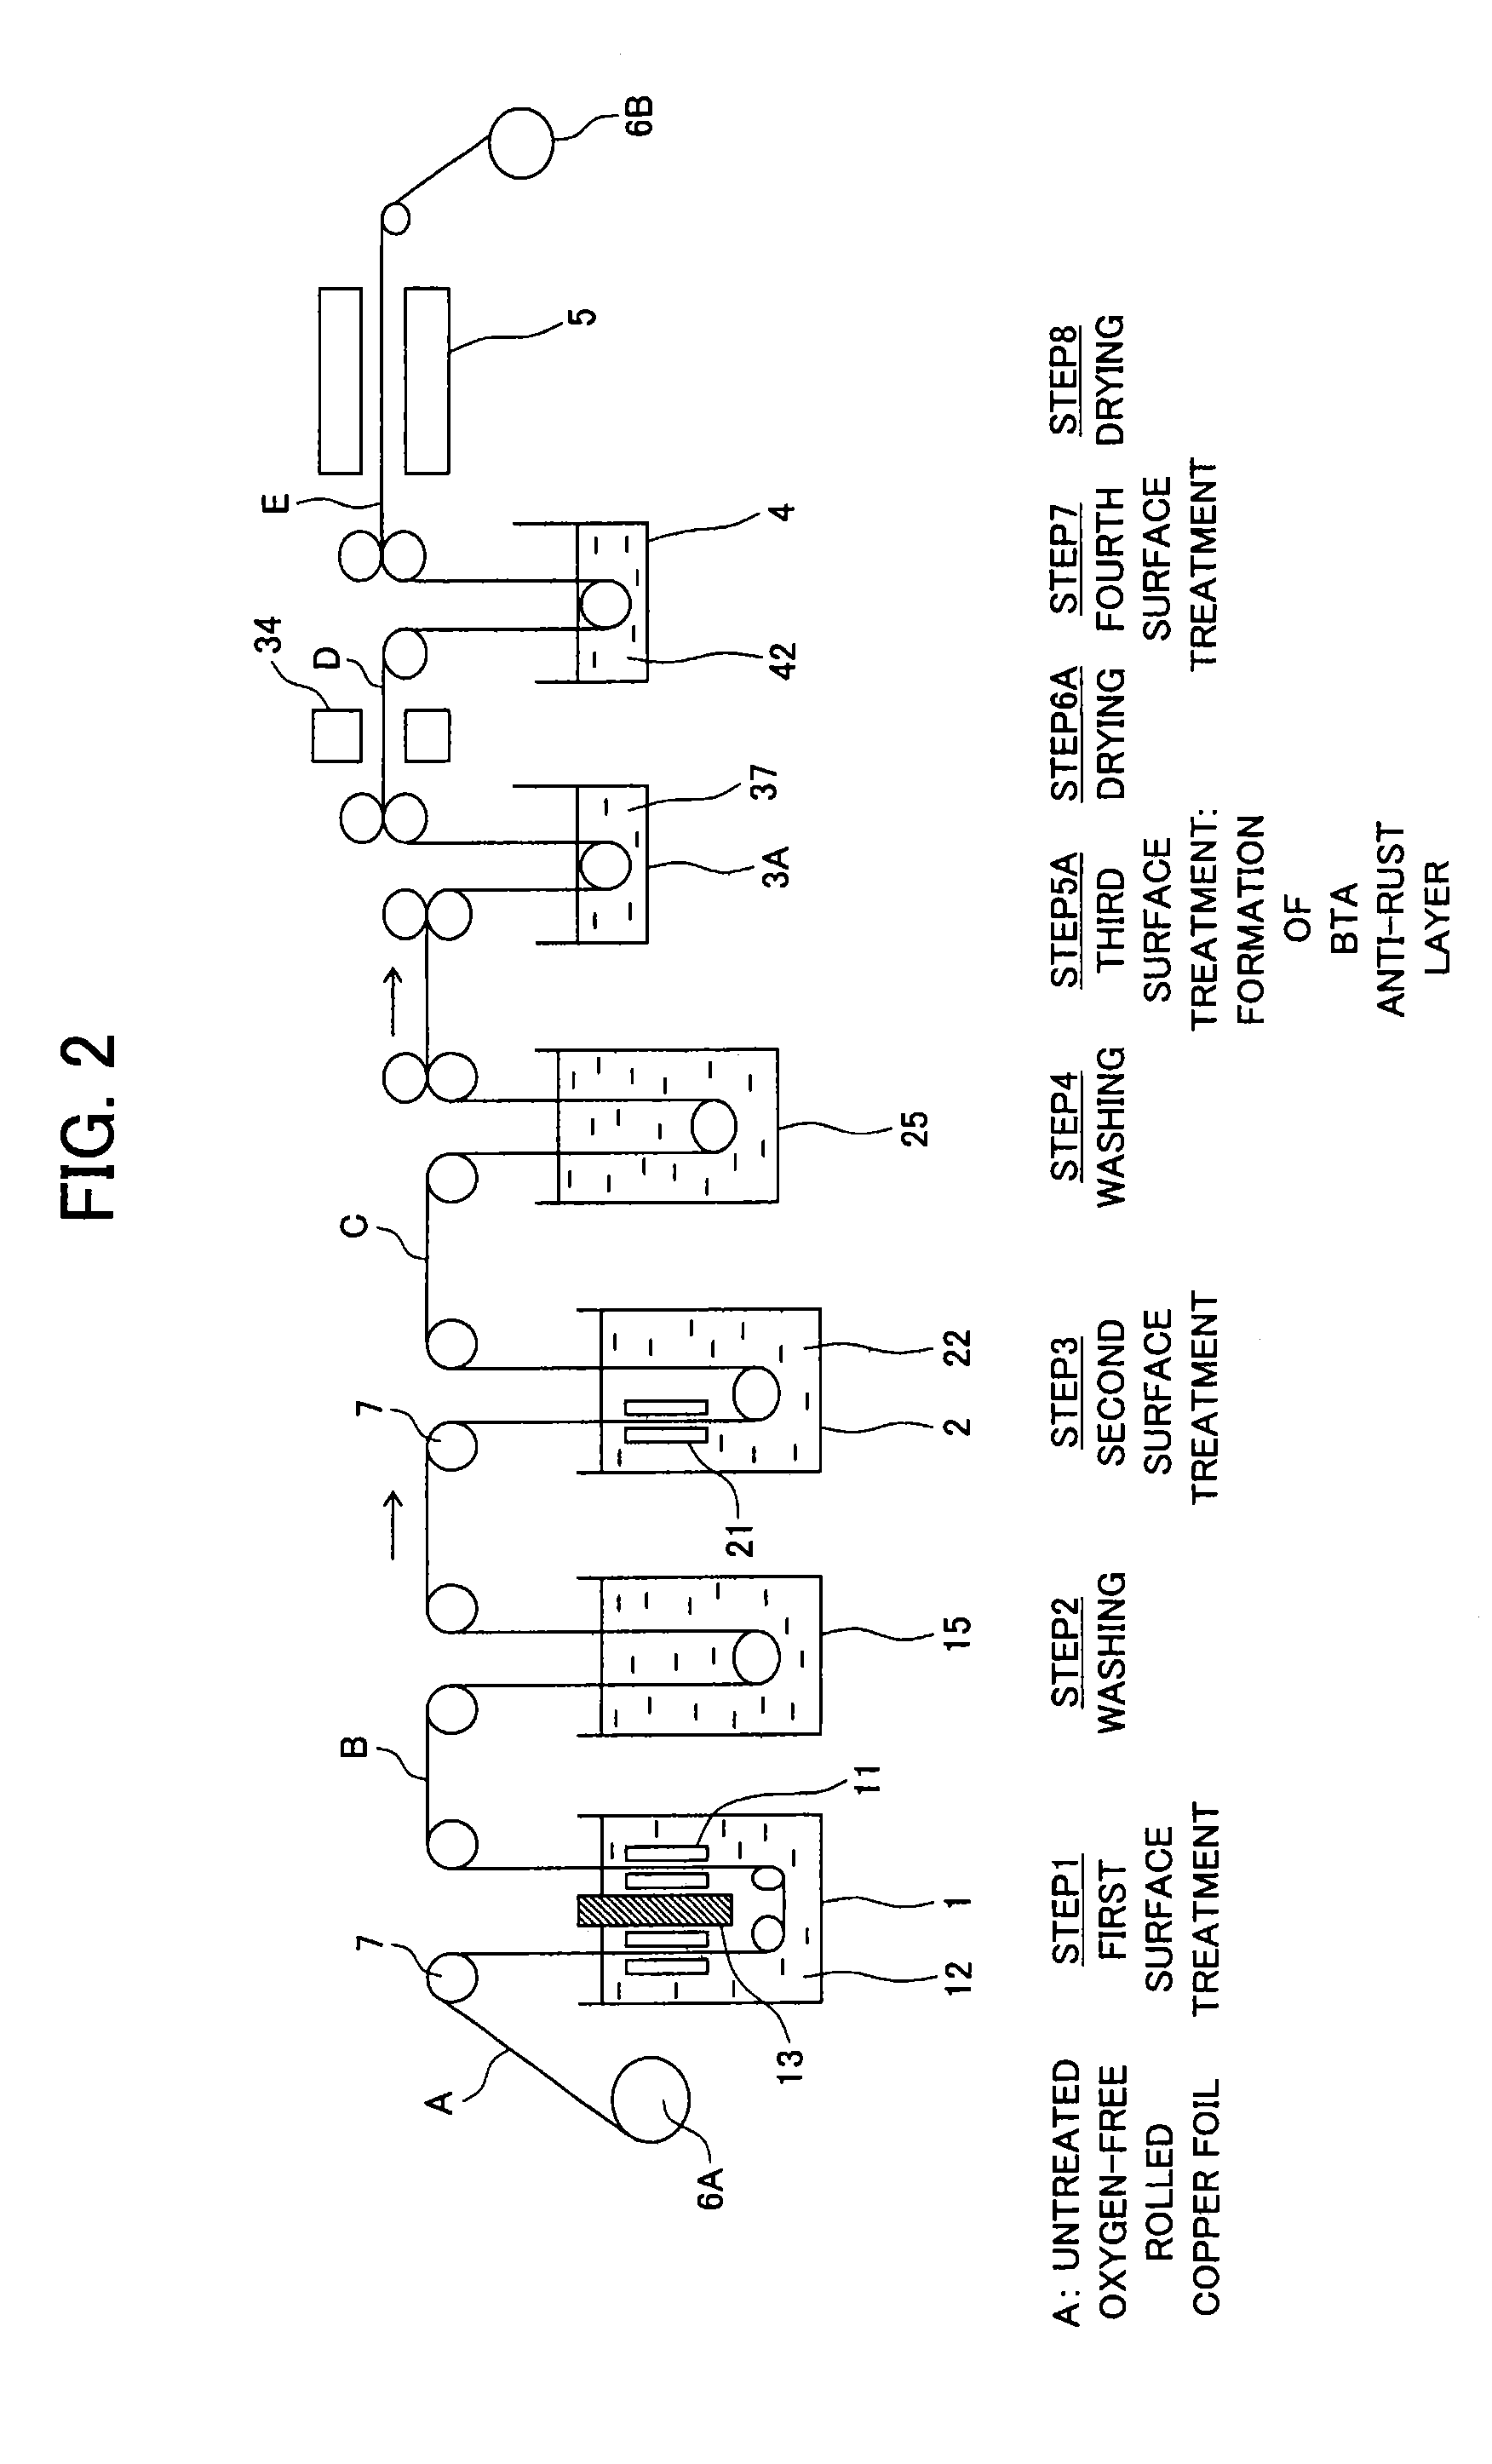 Surface treatment method for copper foil, surface-treated copper foil, and copper foil for negative electrode collector of lithium ion secondary battery